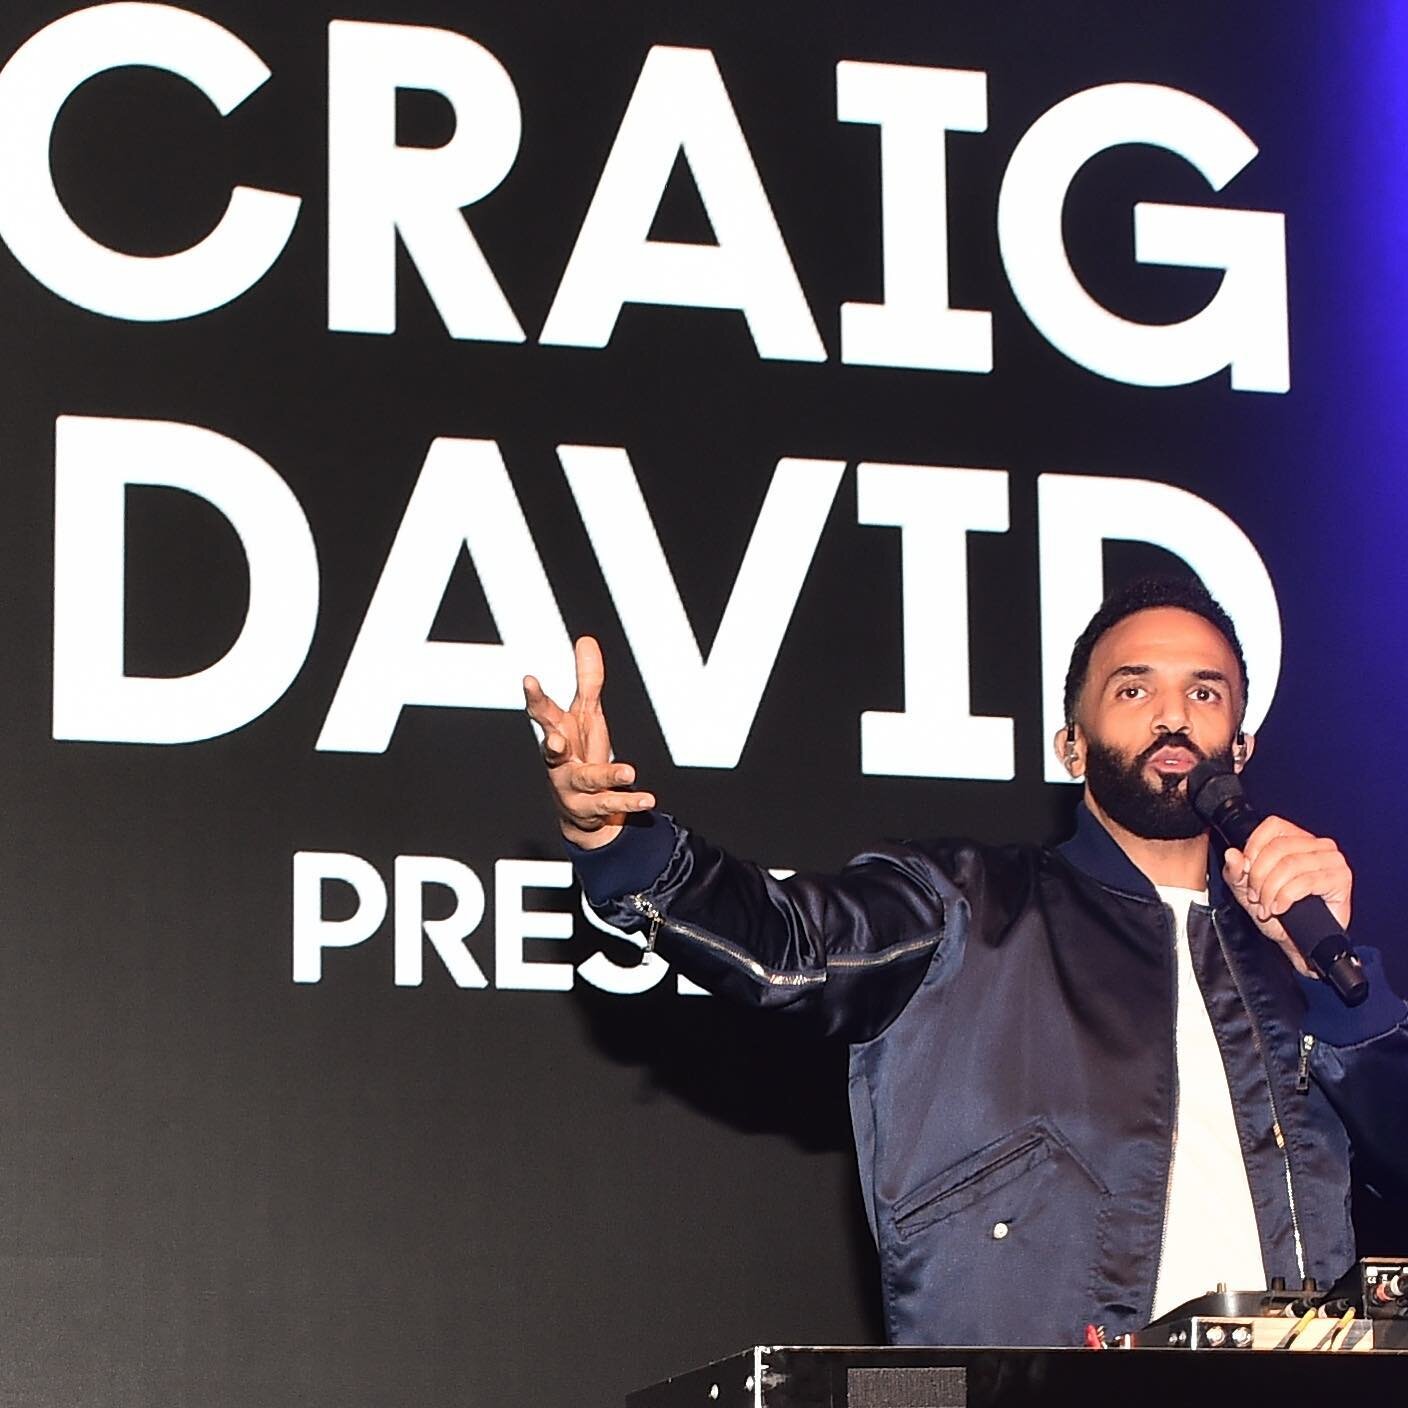 Craig David&rsquo;s live set at the &lsquo;Percy Pig&rsquo;s Dreamland Ball&rsquo; was simply amazing. The party, sponsored by @marksandspencer &amp; @ok_mag, helped to raise &pound;350k for the &lsquo;Together For Short Lives&rsquo; charity. The bal